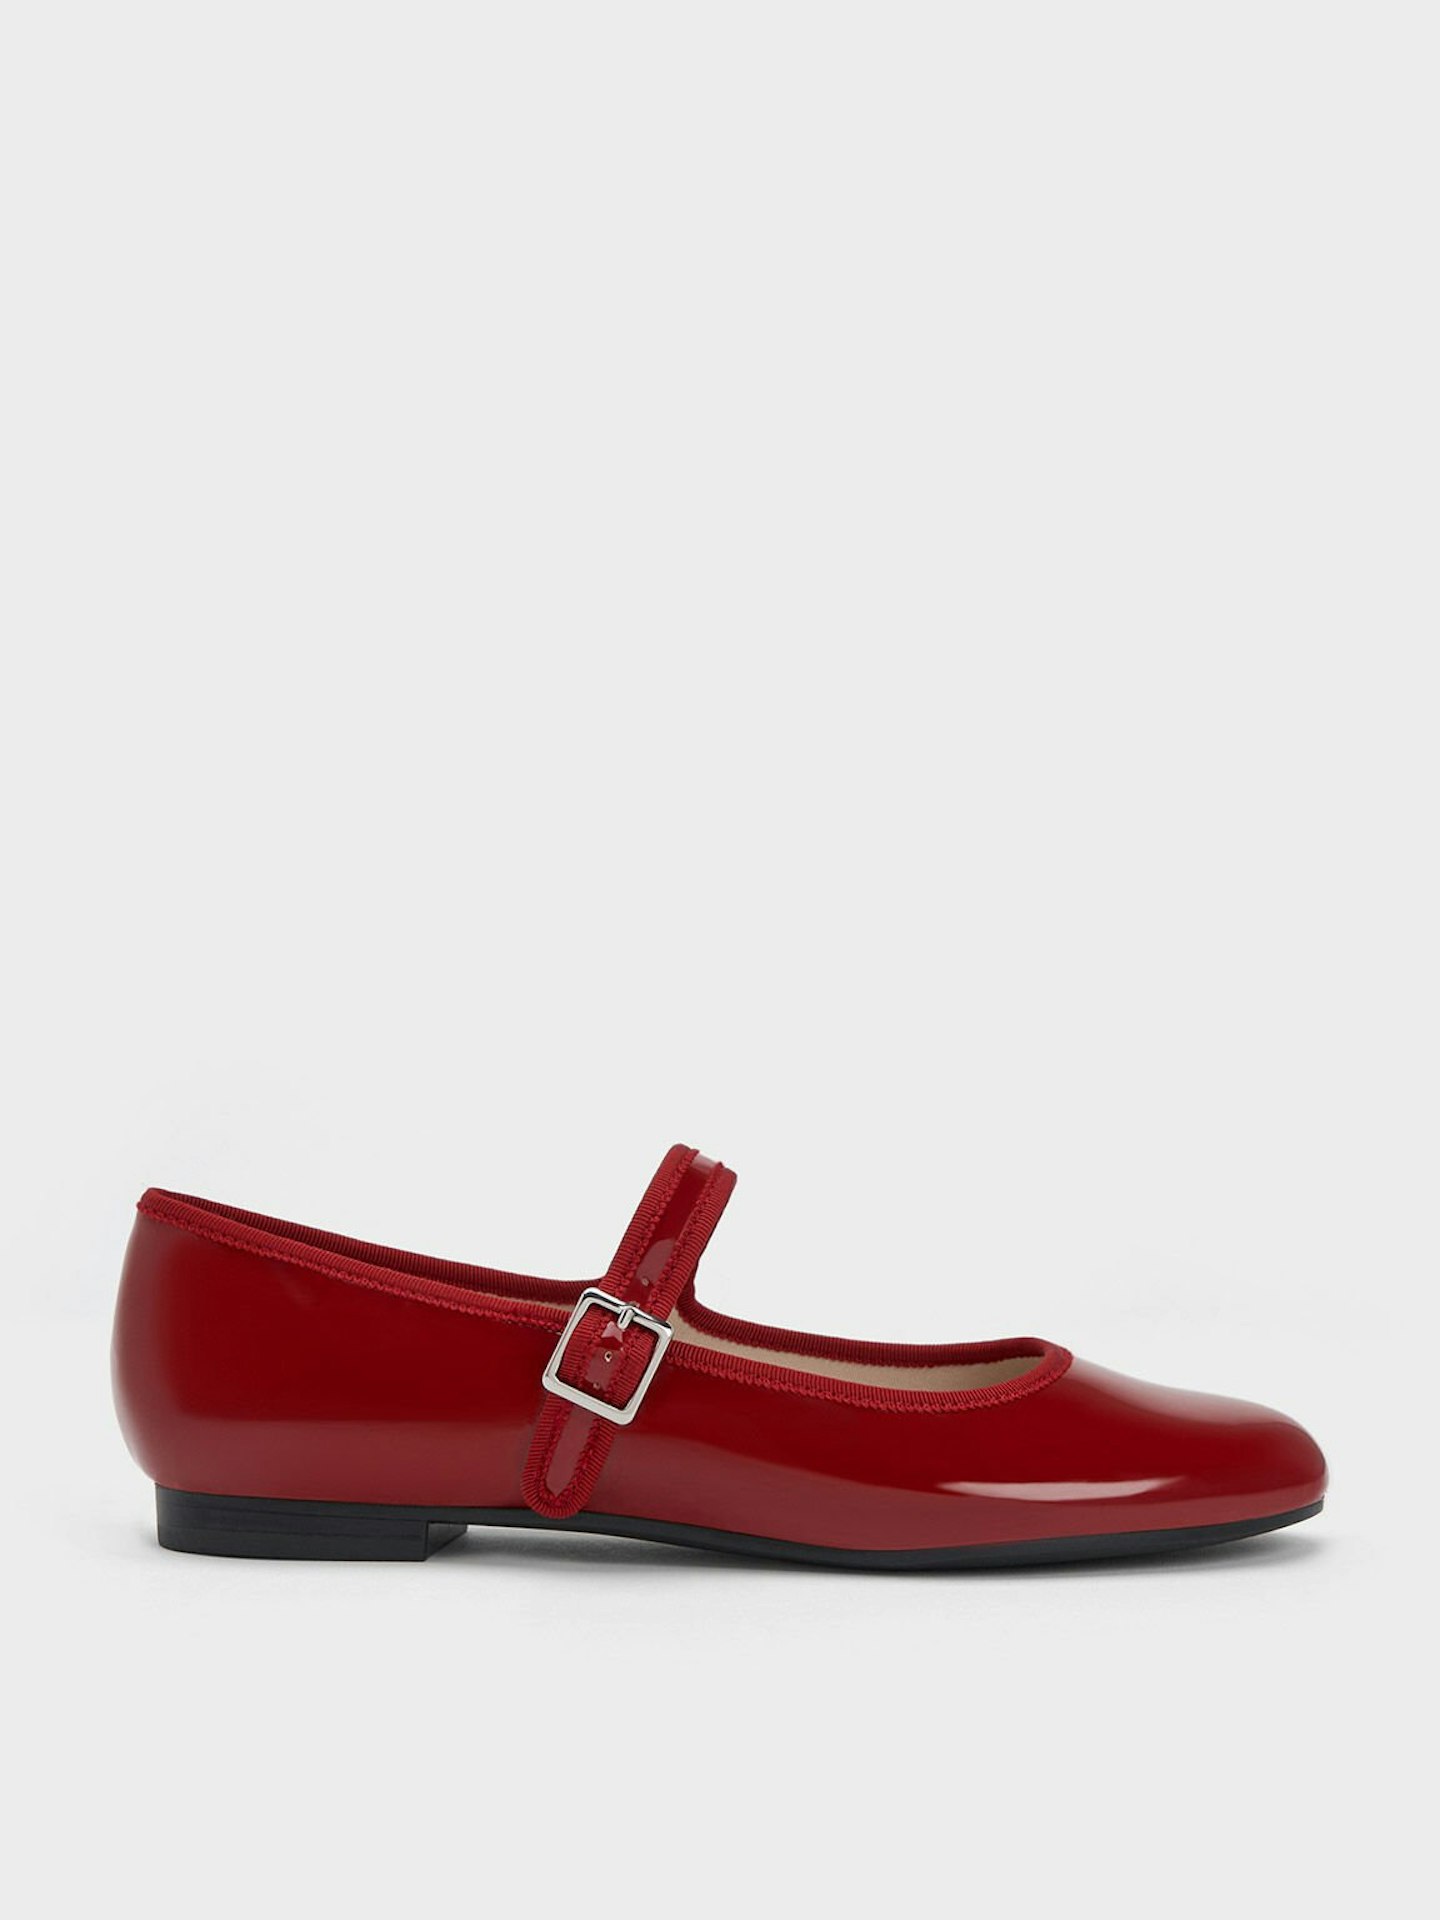 Charles & Keith, Patent Buckled Mary Jane Flats